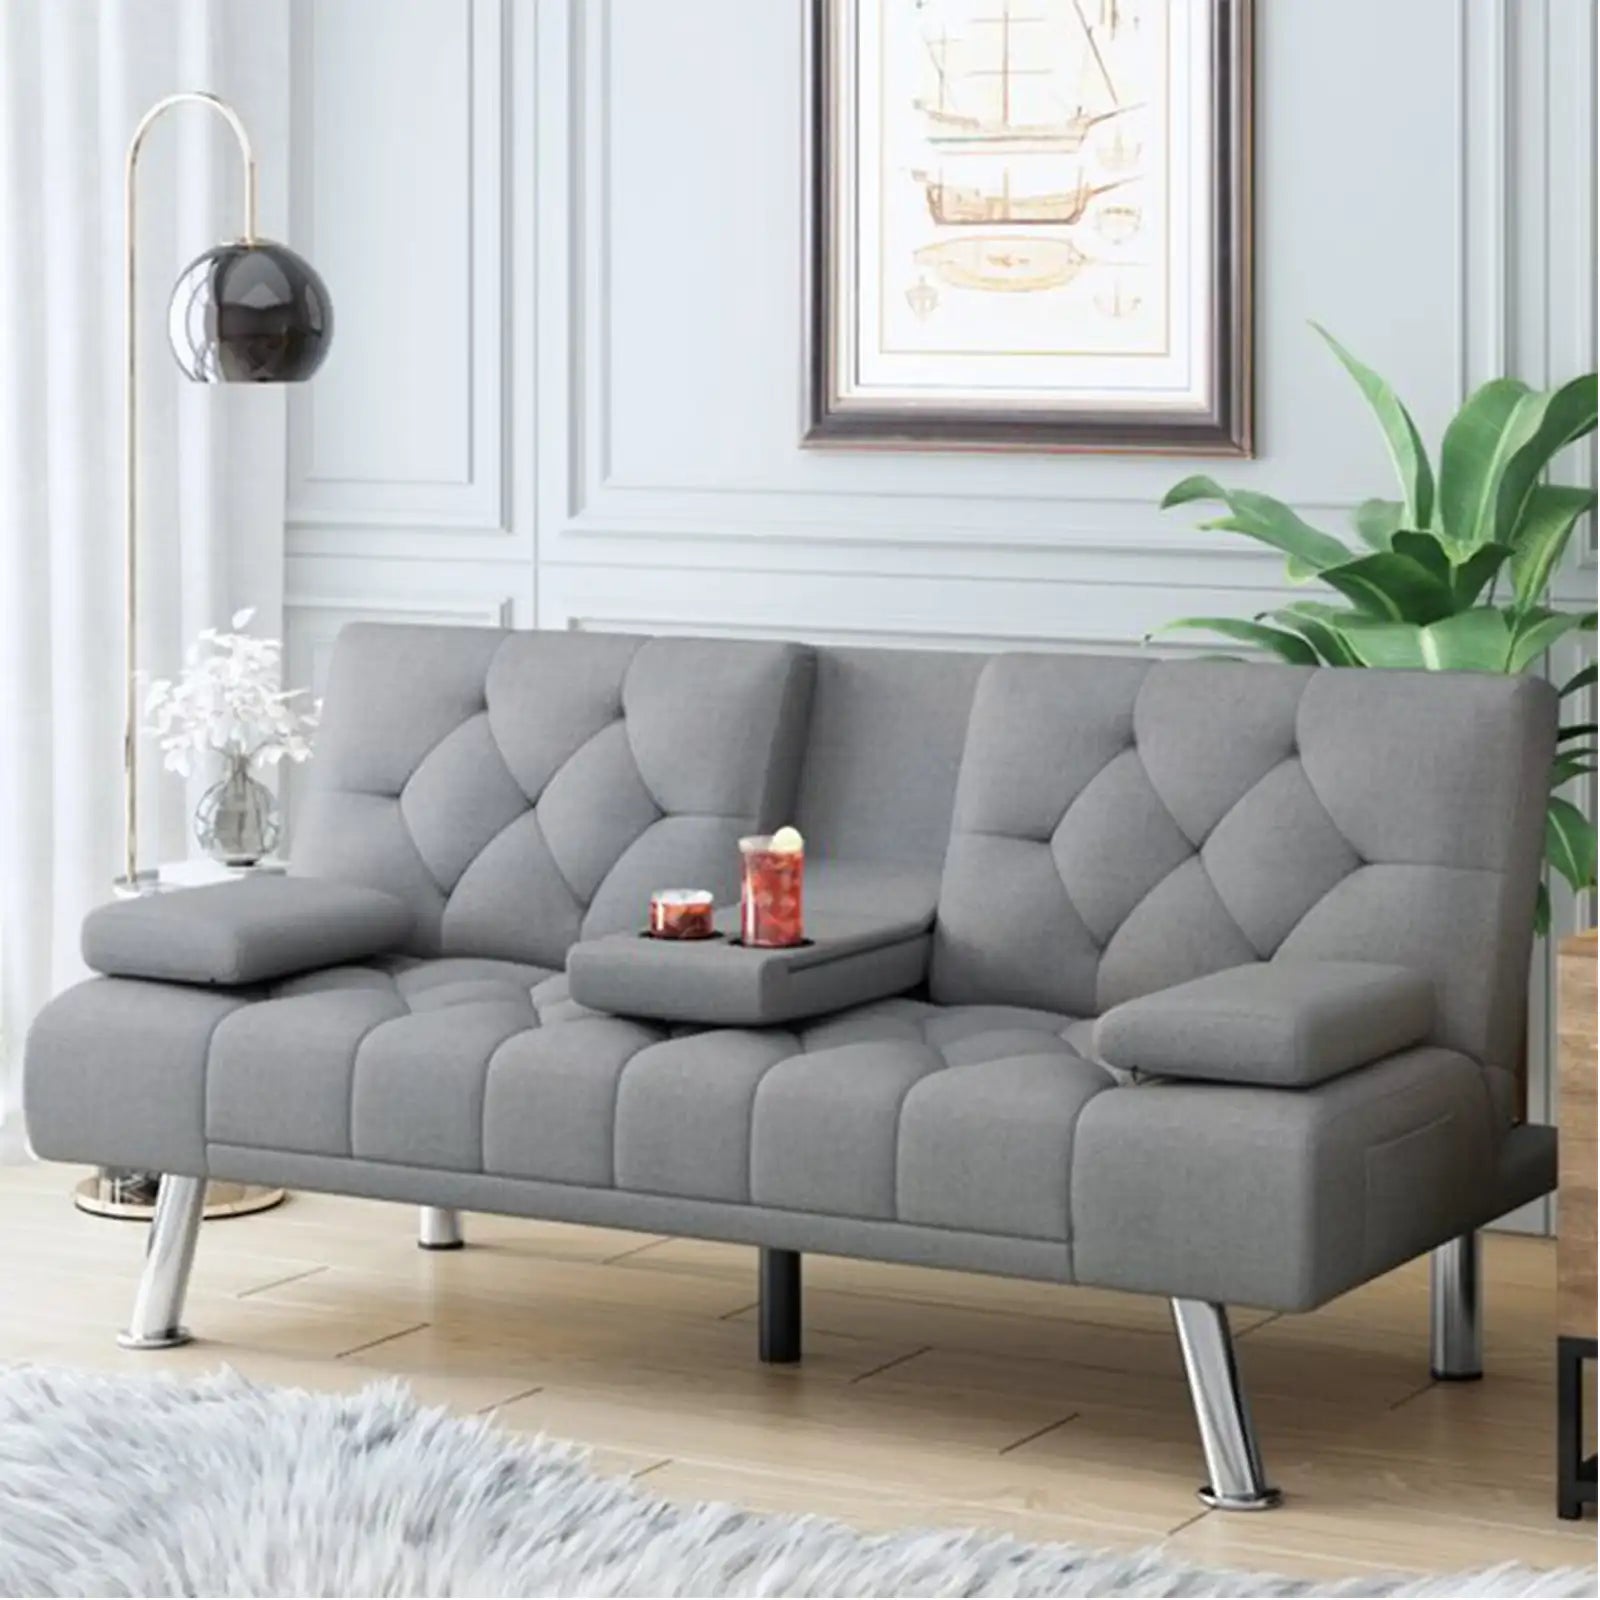 Upholstered Folding Sleeper Sofa with Removable Armrests, Couch for Small Space